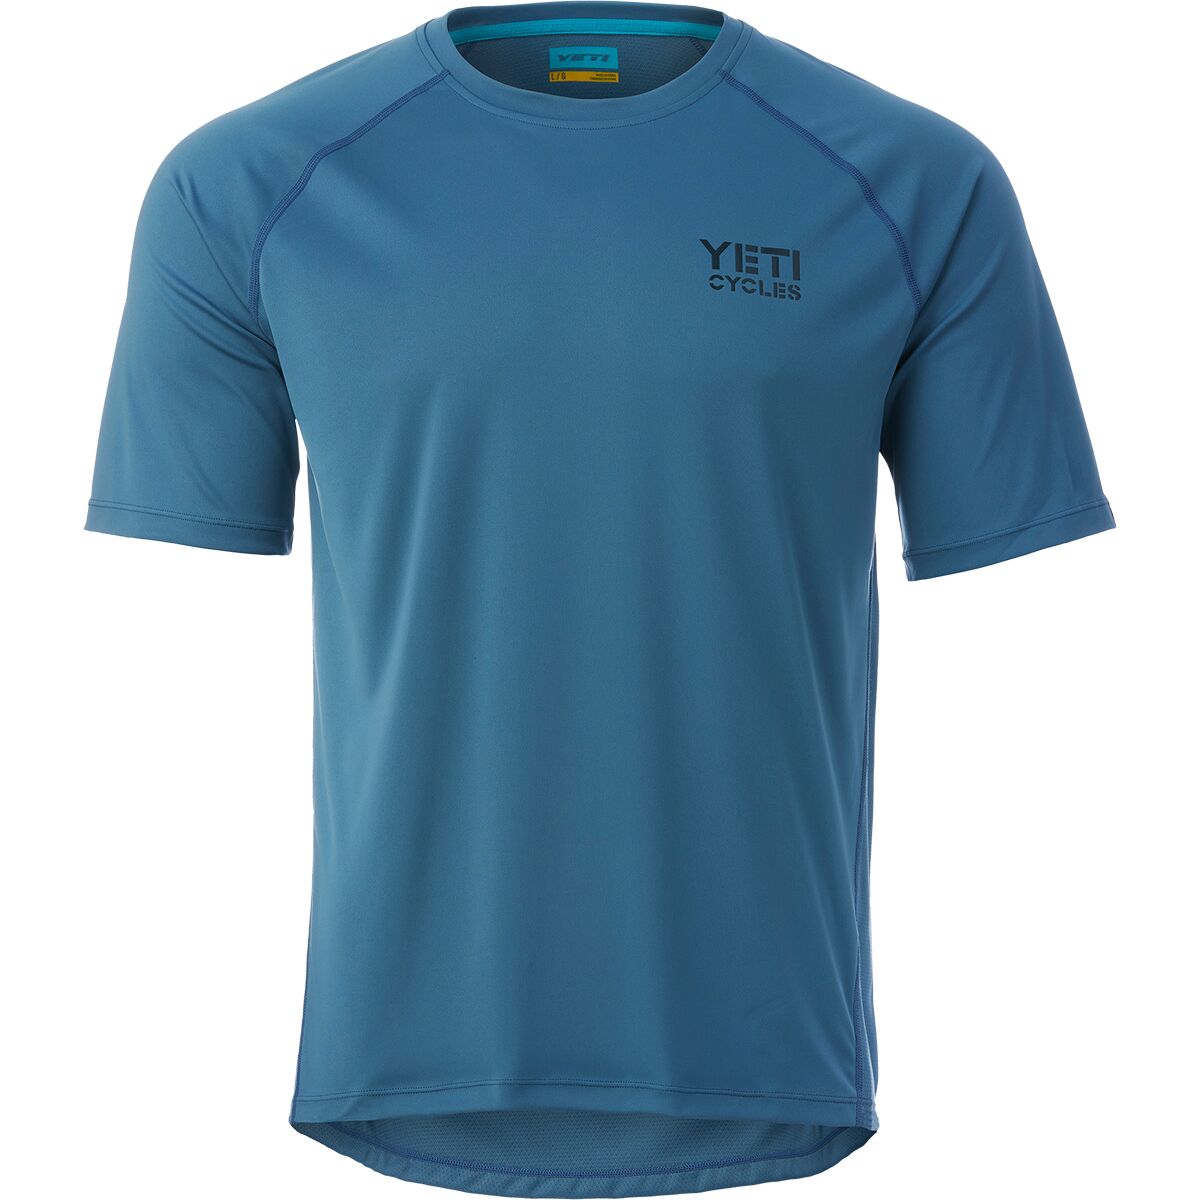 Yeti Cycles Tolland Short-Sleeve Jersey - Men's Pressure Blue, S